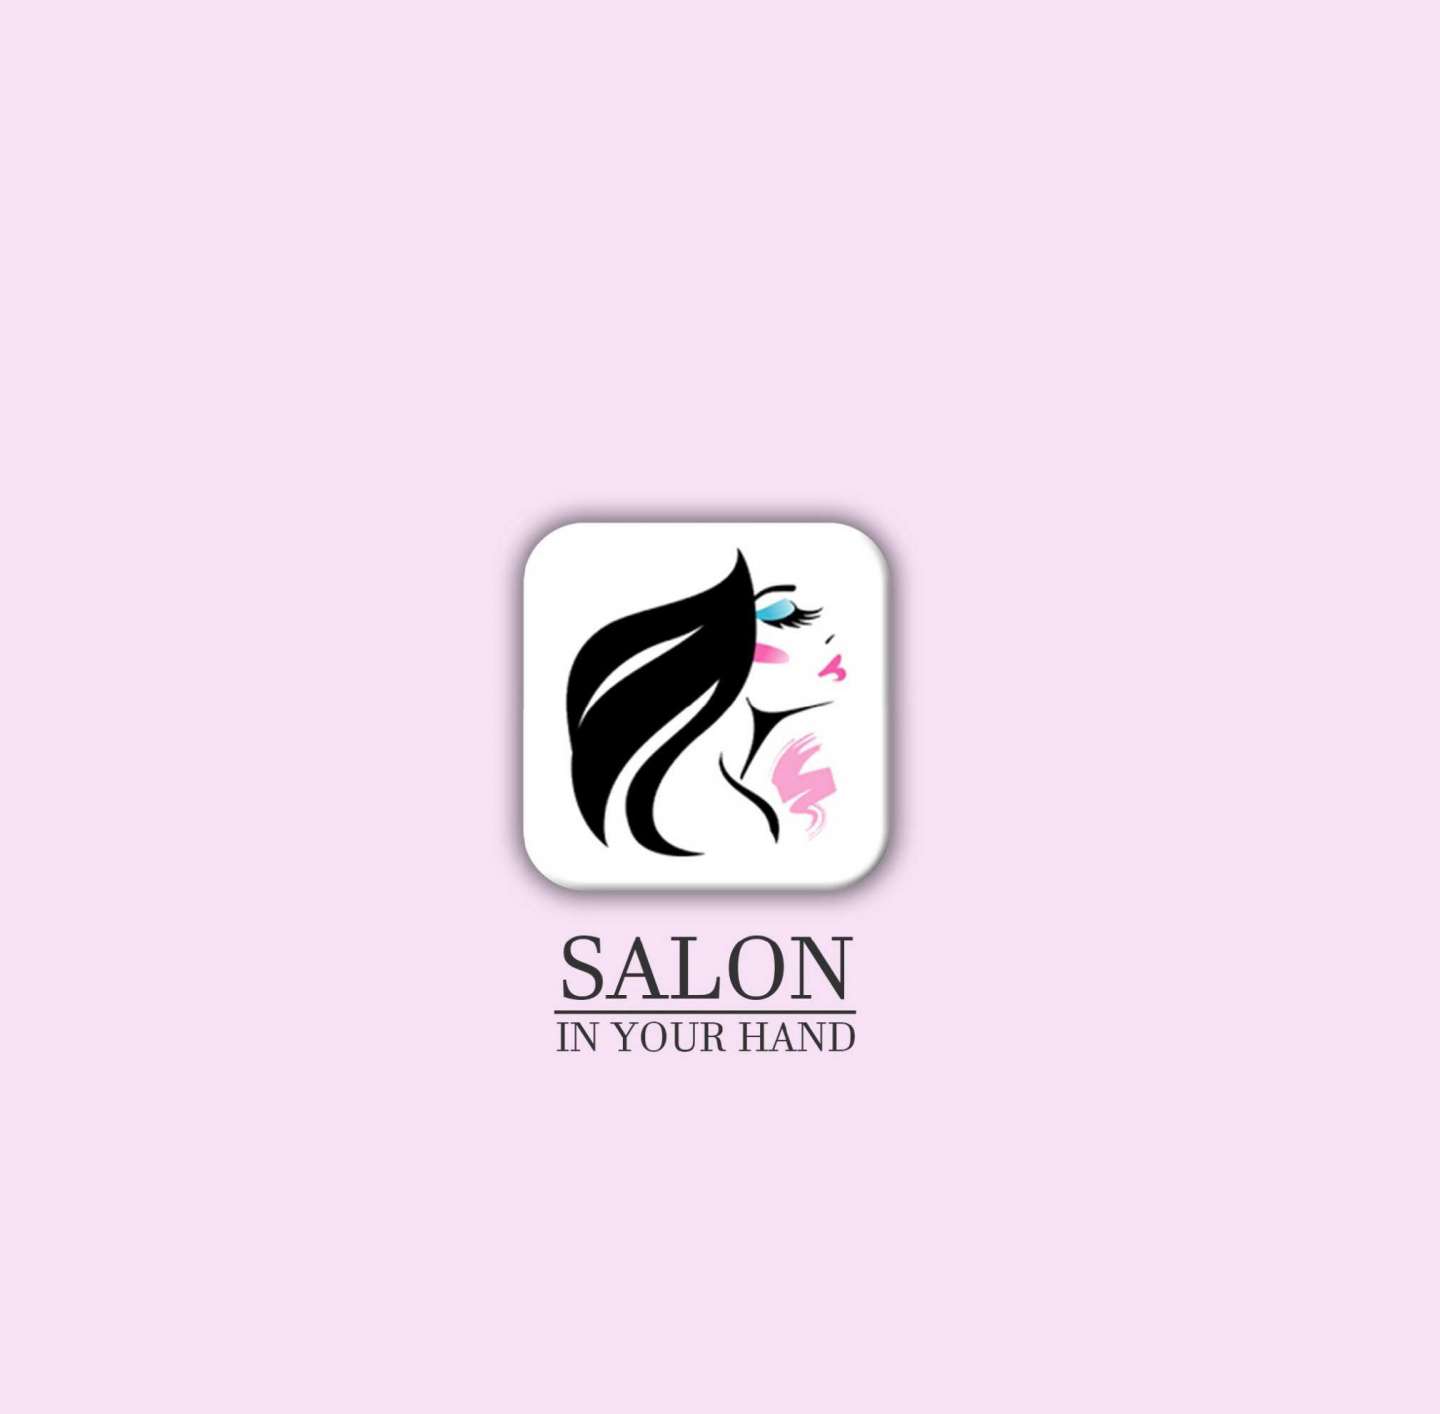 Salon in your hand